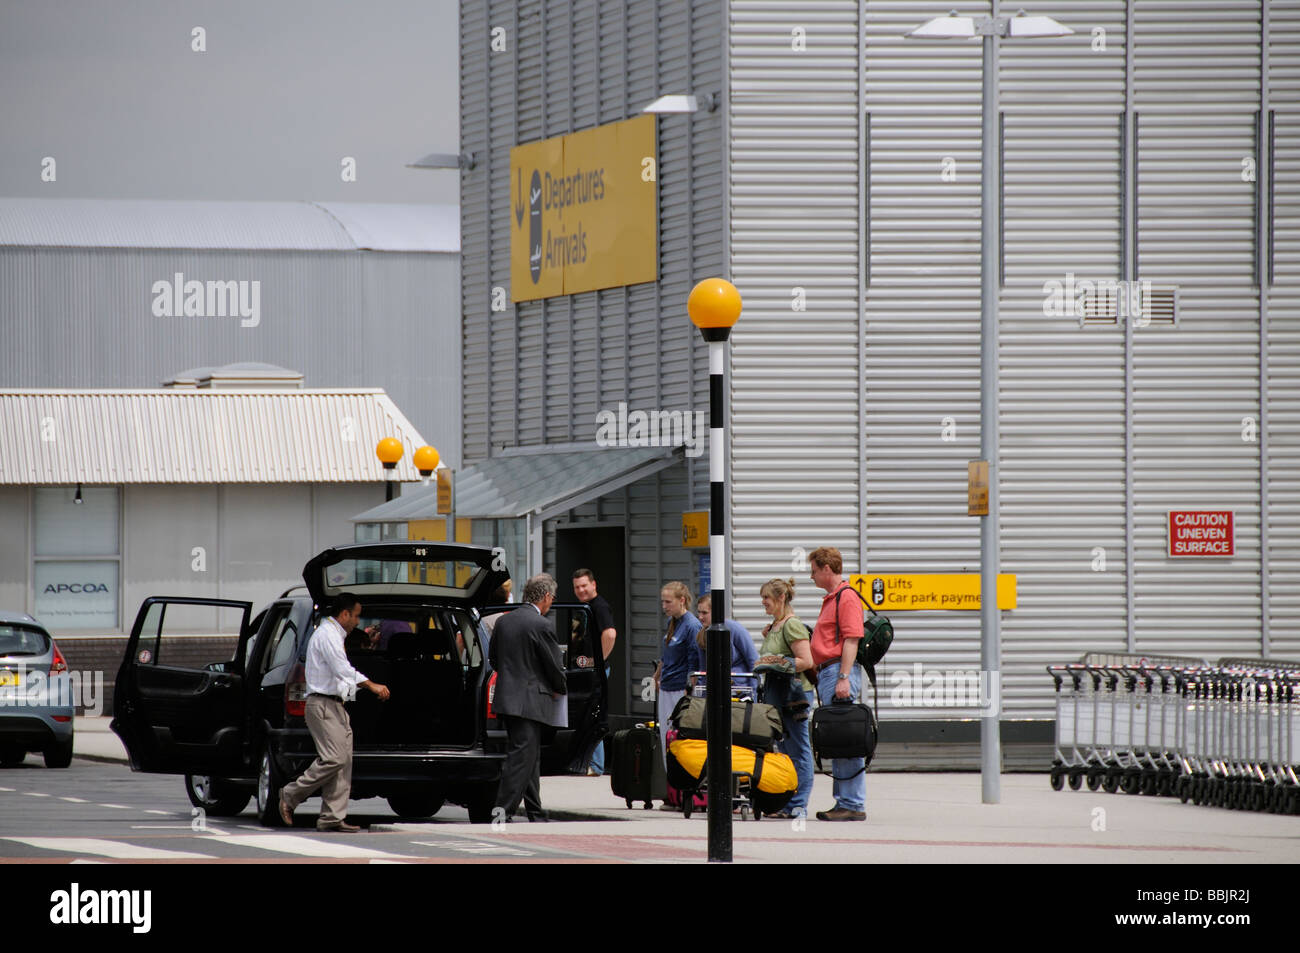 Meet and greet travellers being picked up at terminal 4 London Heathrow Airport England UK Stock Photo